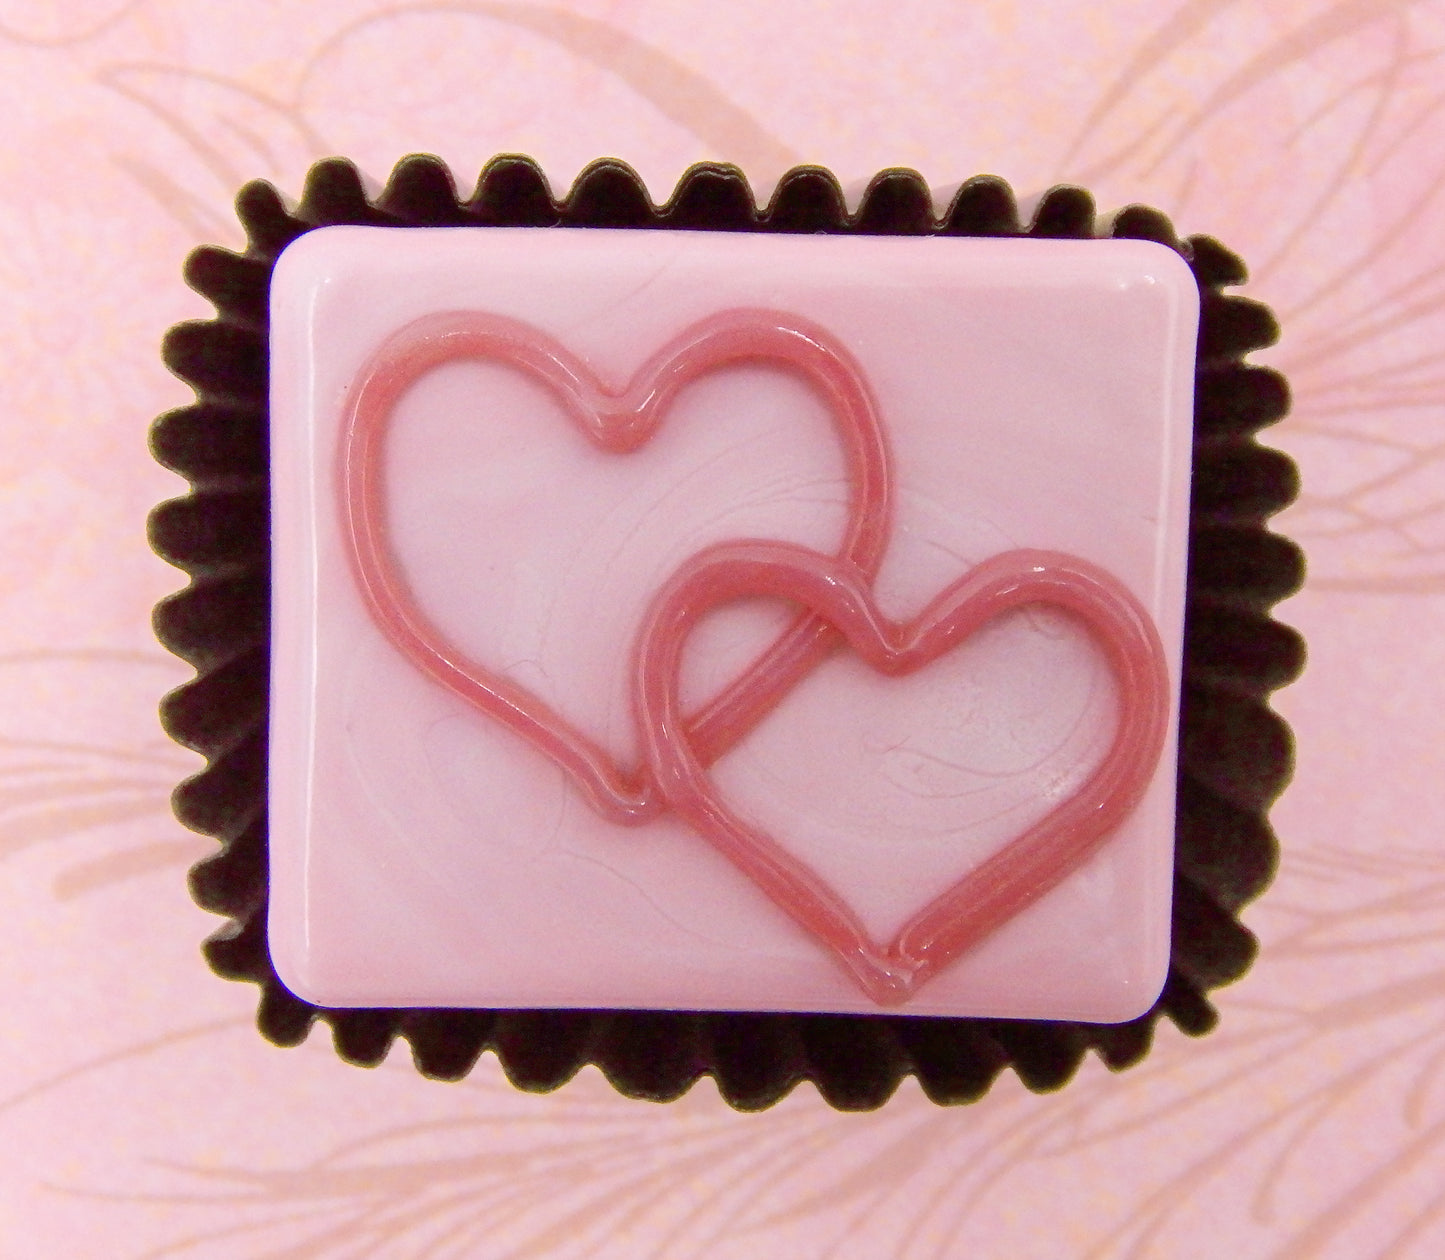 Chocolate Treats with Creamy Double Hearts - Assorted Colors (14-015+)